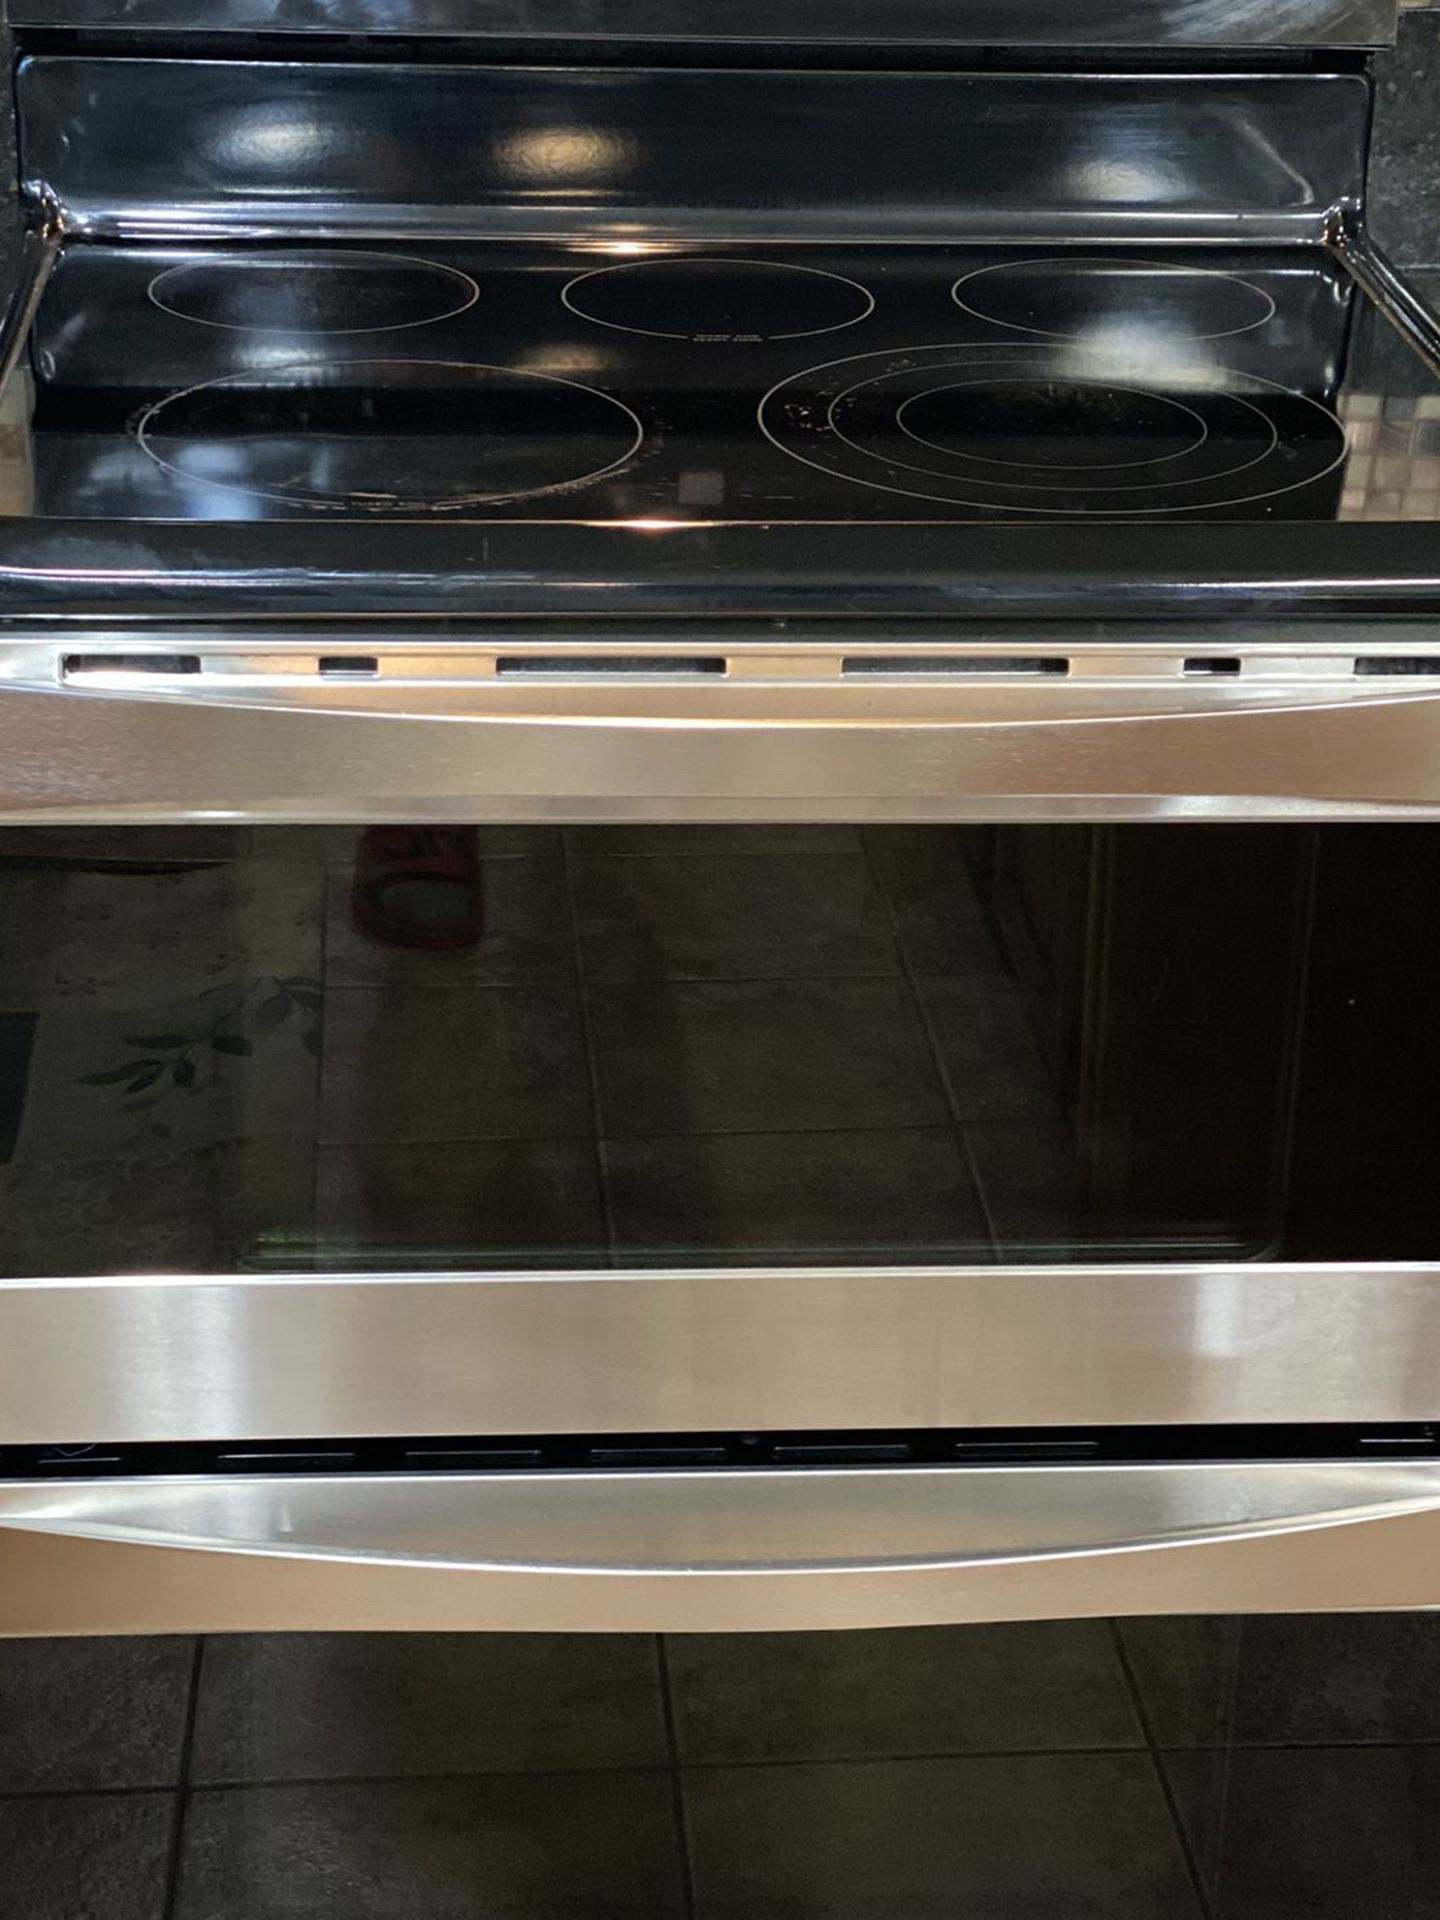 Kenmore Elite 30” Convention Double Stainless Steel Glass top Oven